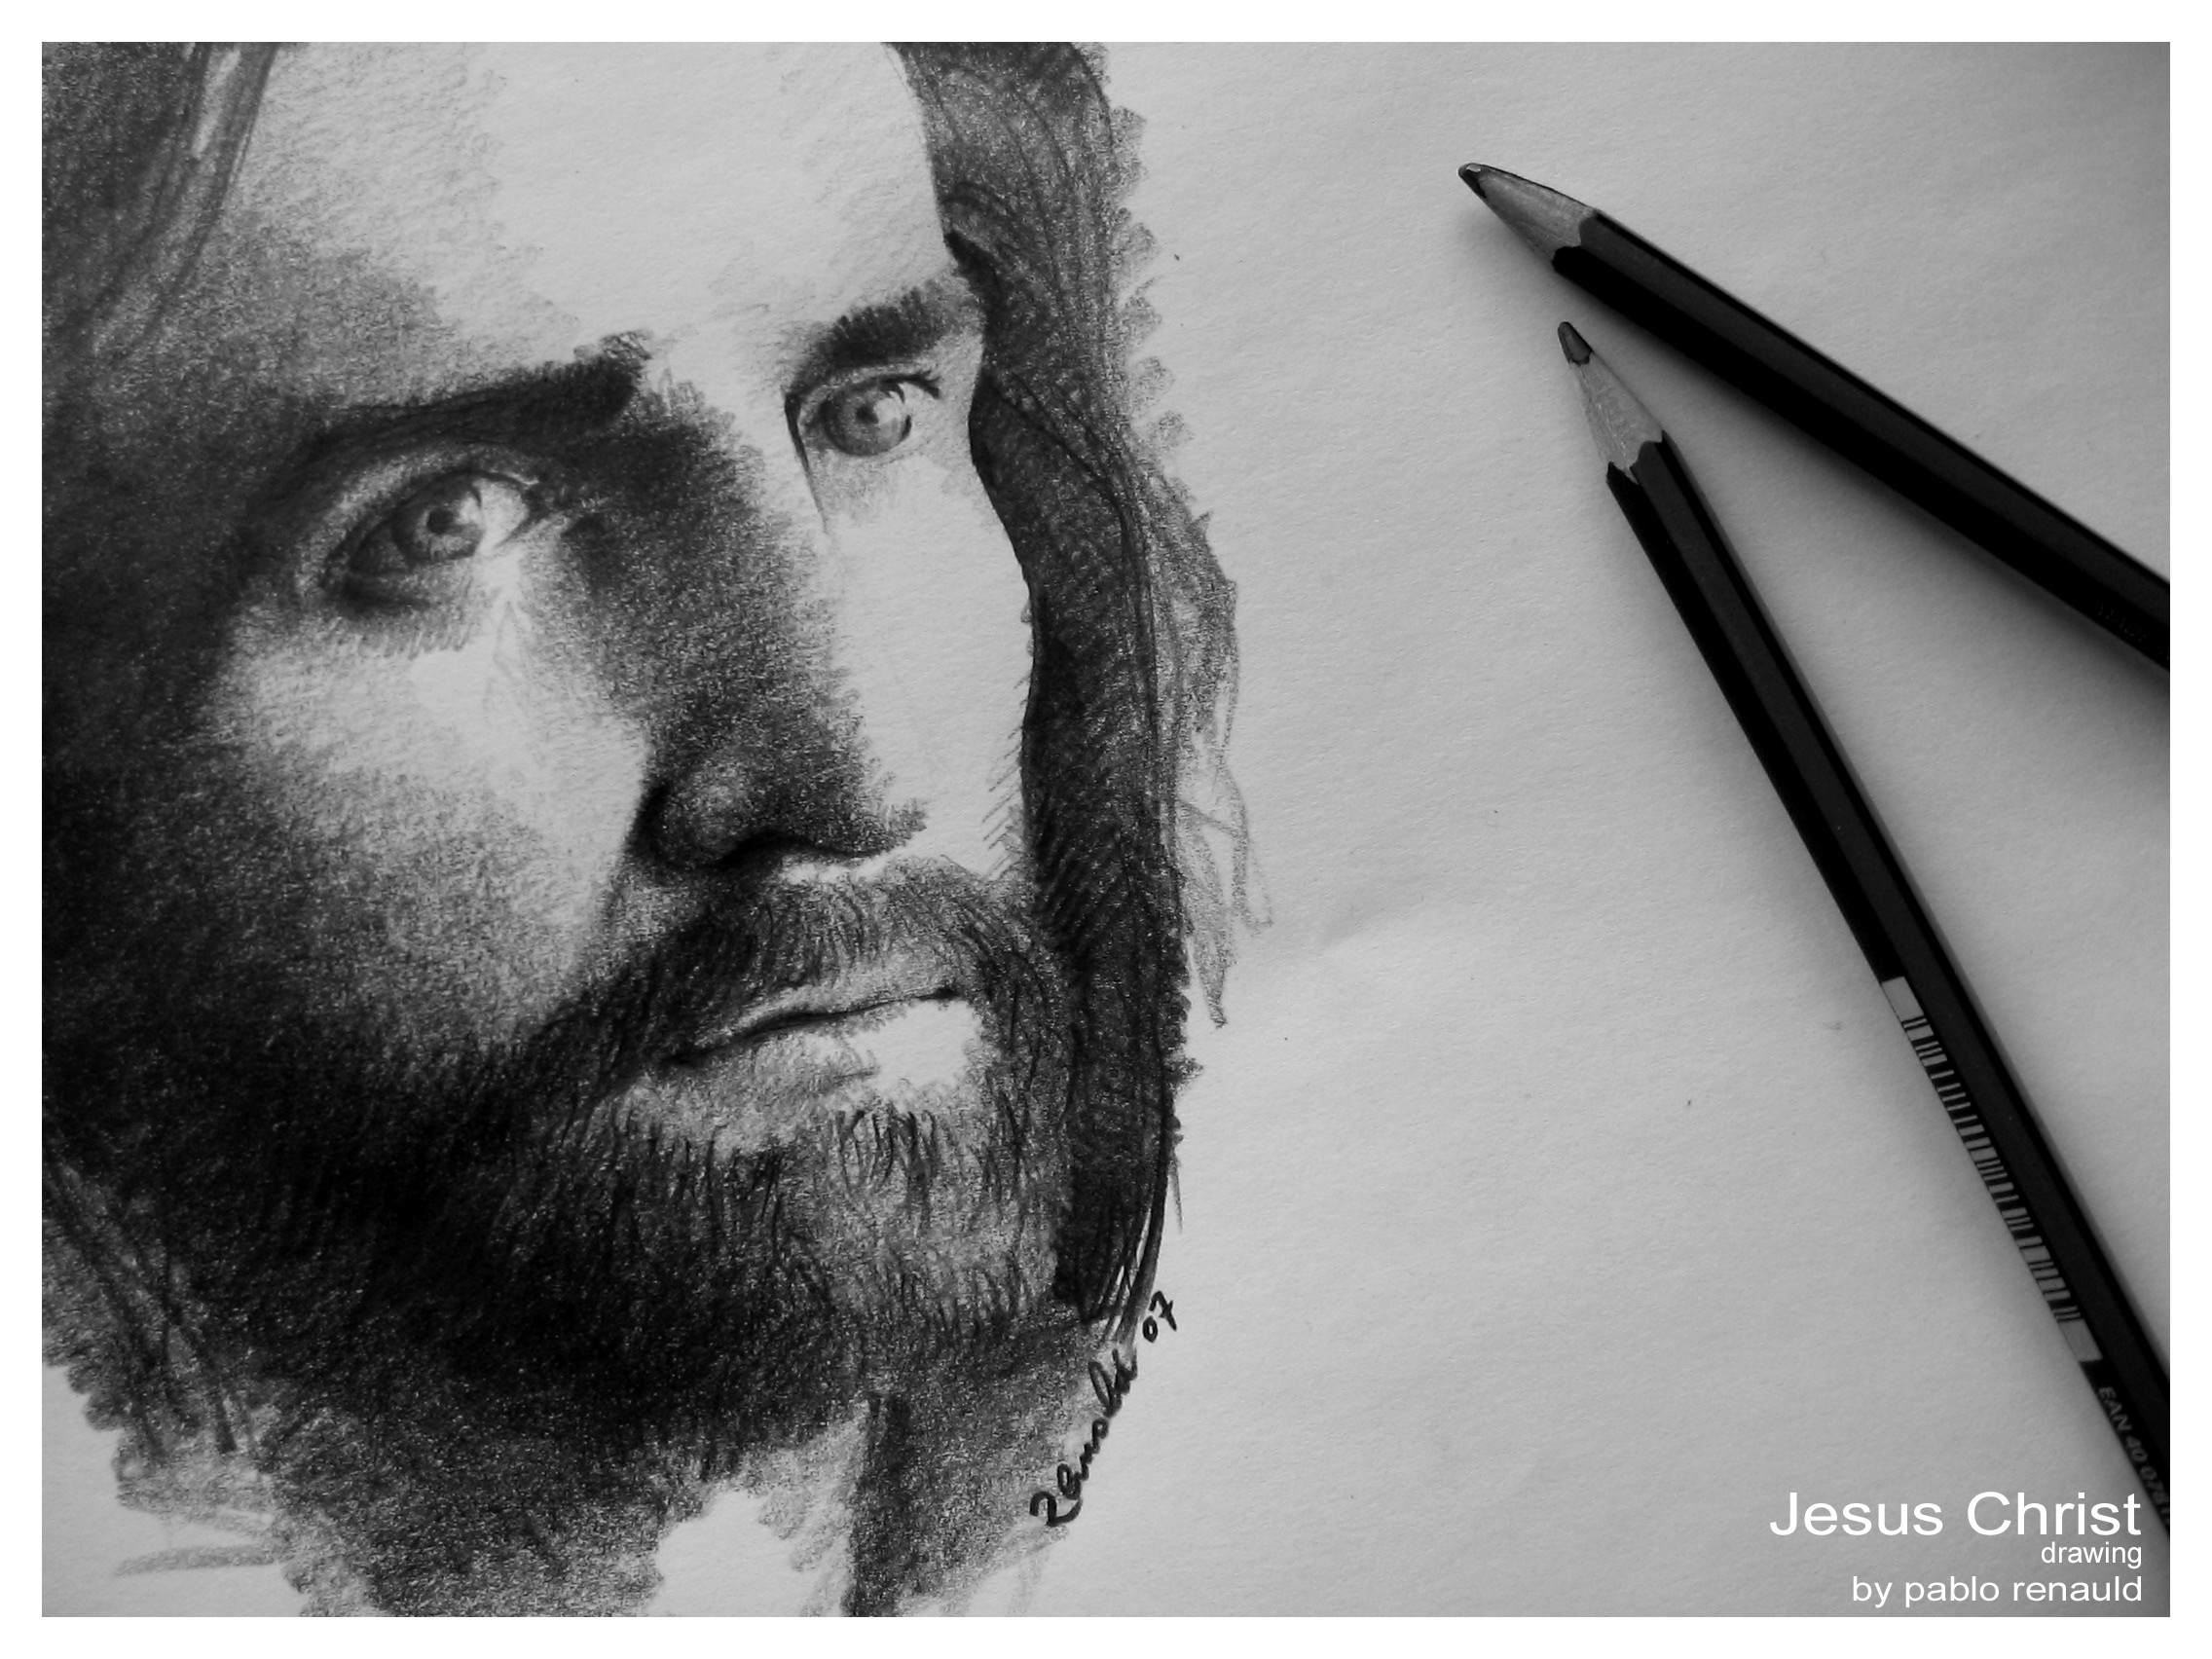 2272x1704 Creative for Christ images Jesus Christ Drawing HD wallpaper and .